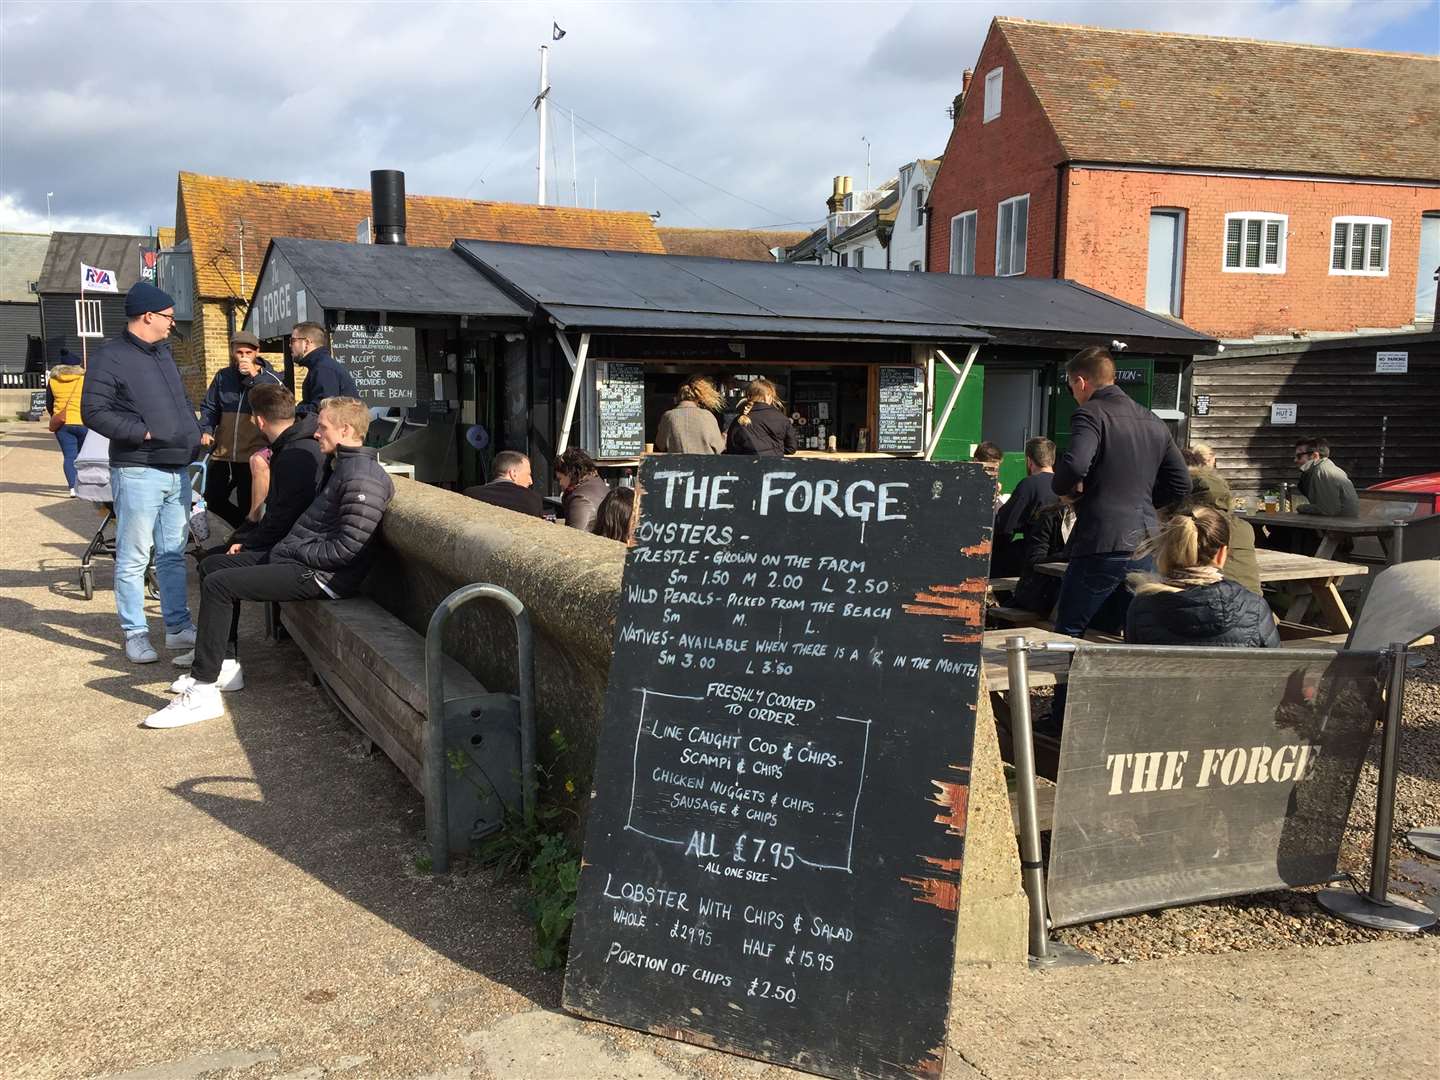 Plans to expand The Forge in Whitstable have been refused